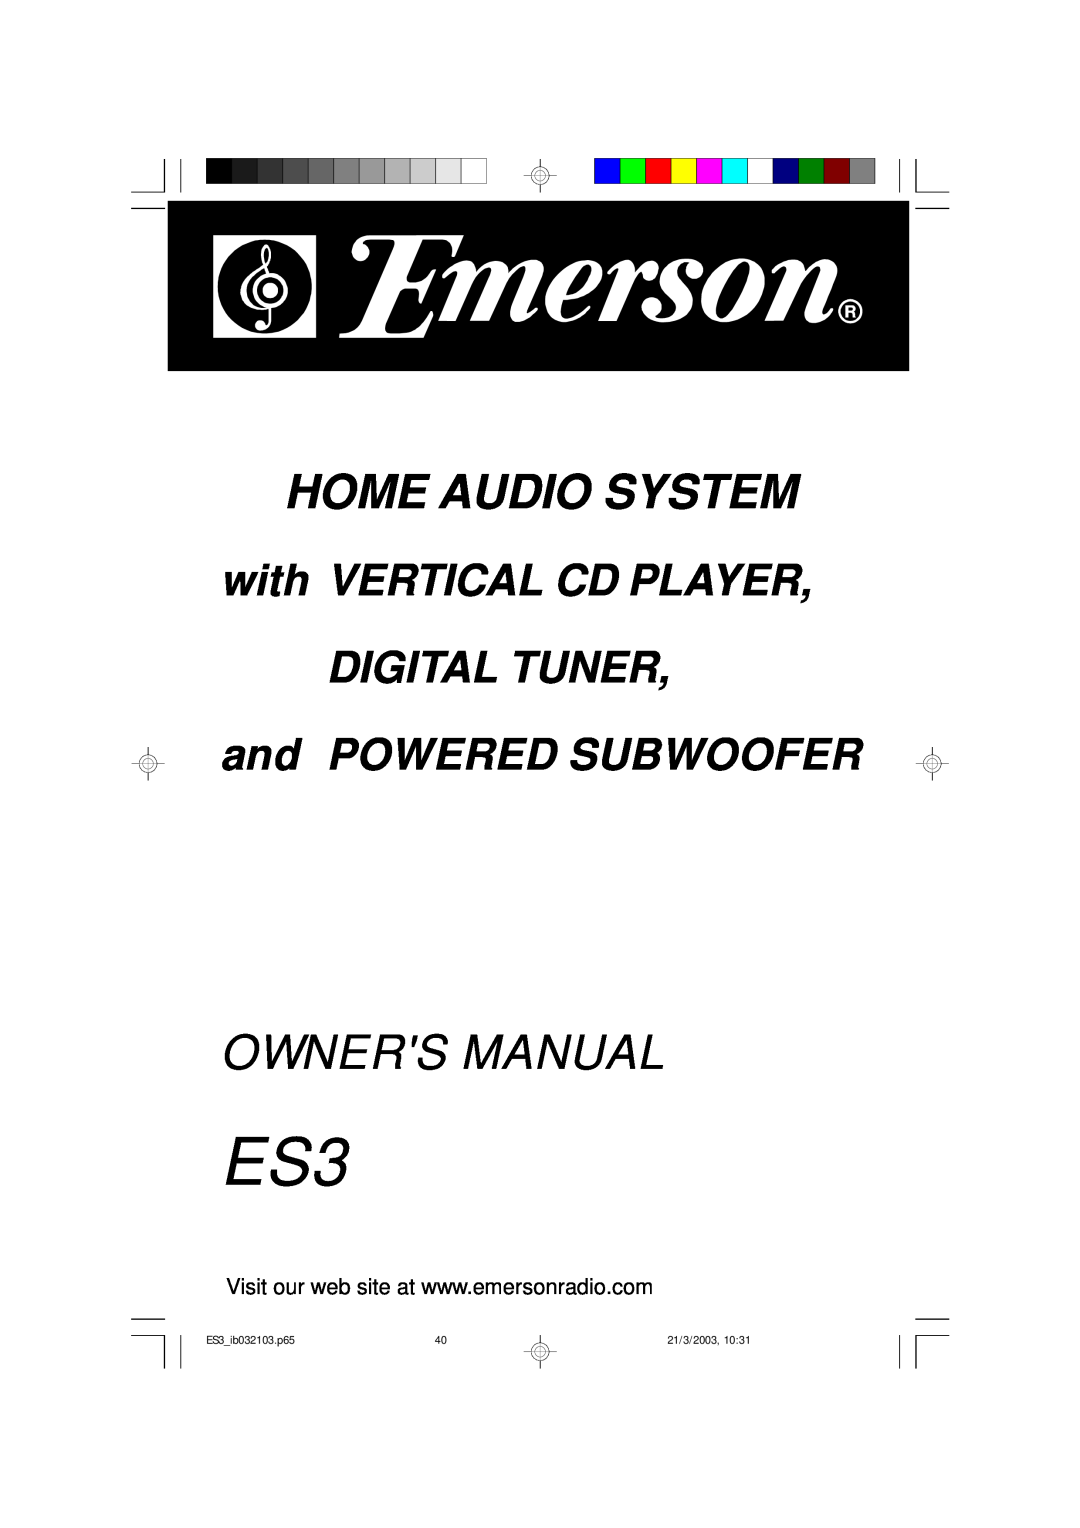 Emerson owner manual Home Audio System, with VERTICAL CD PLAYER DIGITAL TUNER, and POWERED SUBWOOFER, ES3 ib032103.p65 